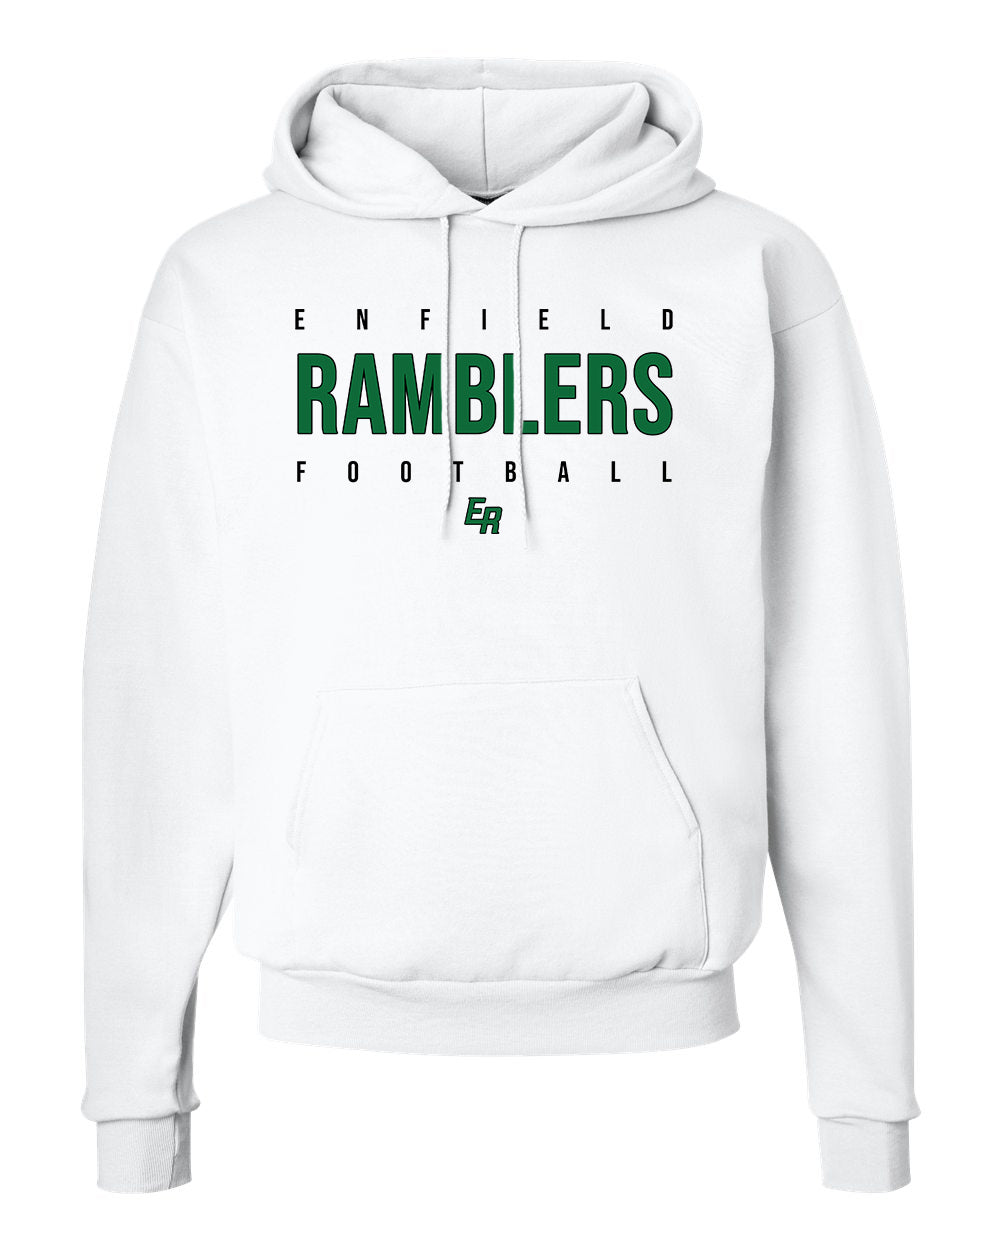 Ramblers Adult Hooded 50/50 Sweatshirt - 996MR (color options available)